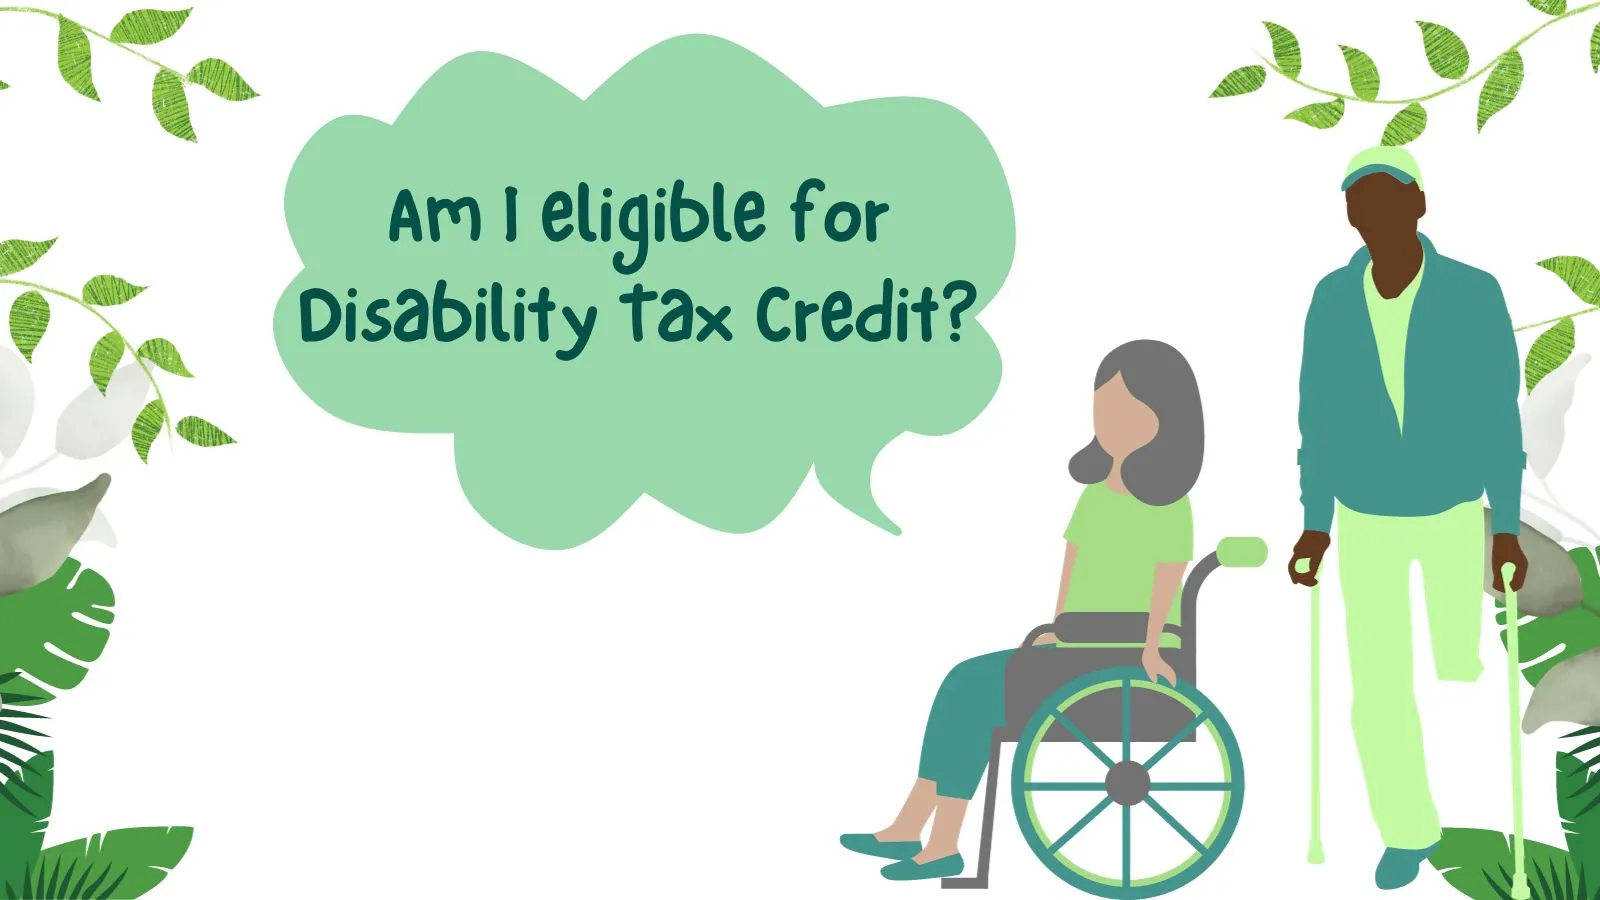 How to claim disability tax credit?